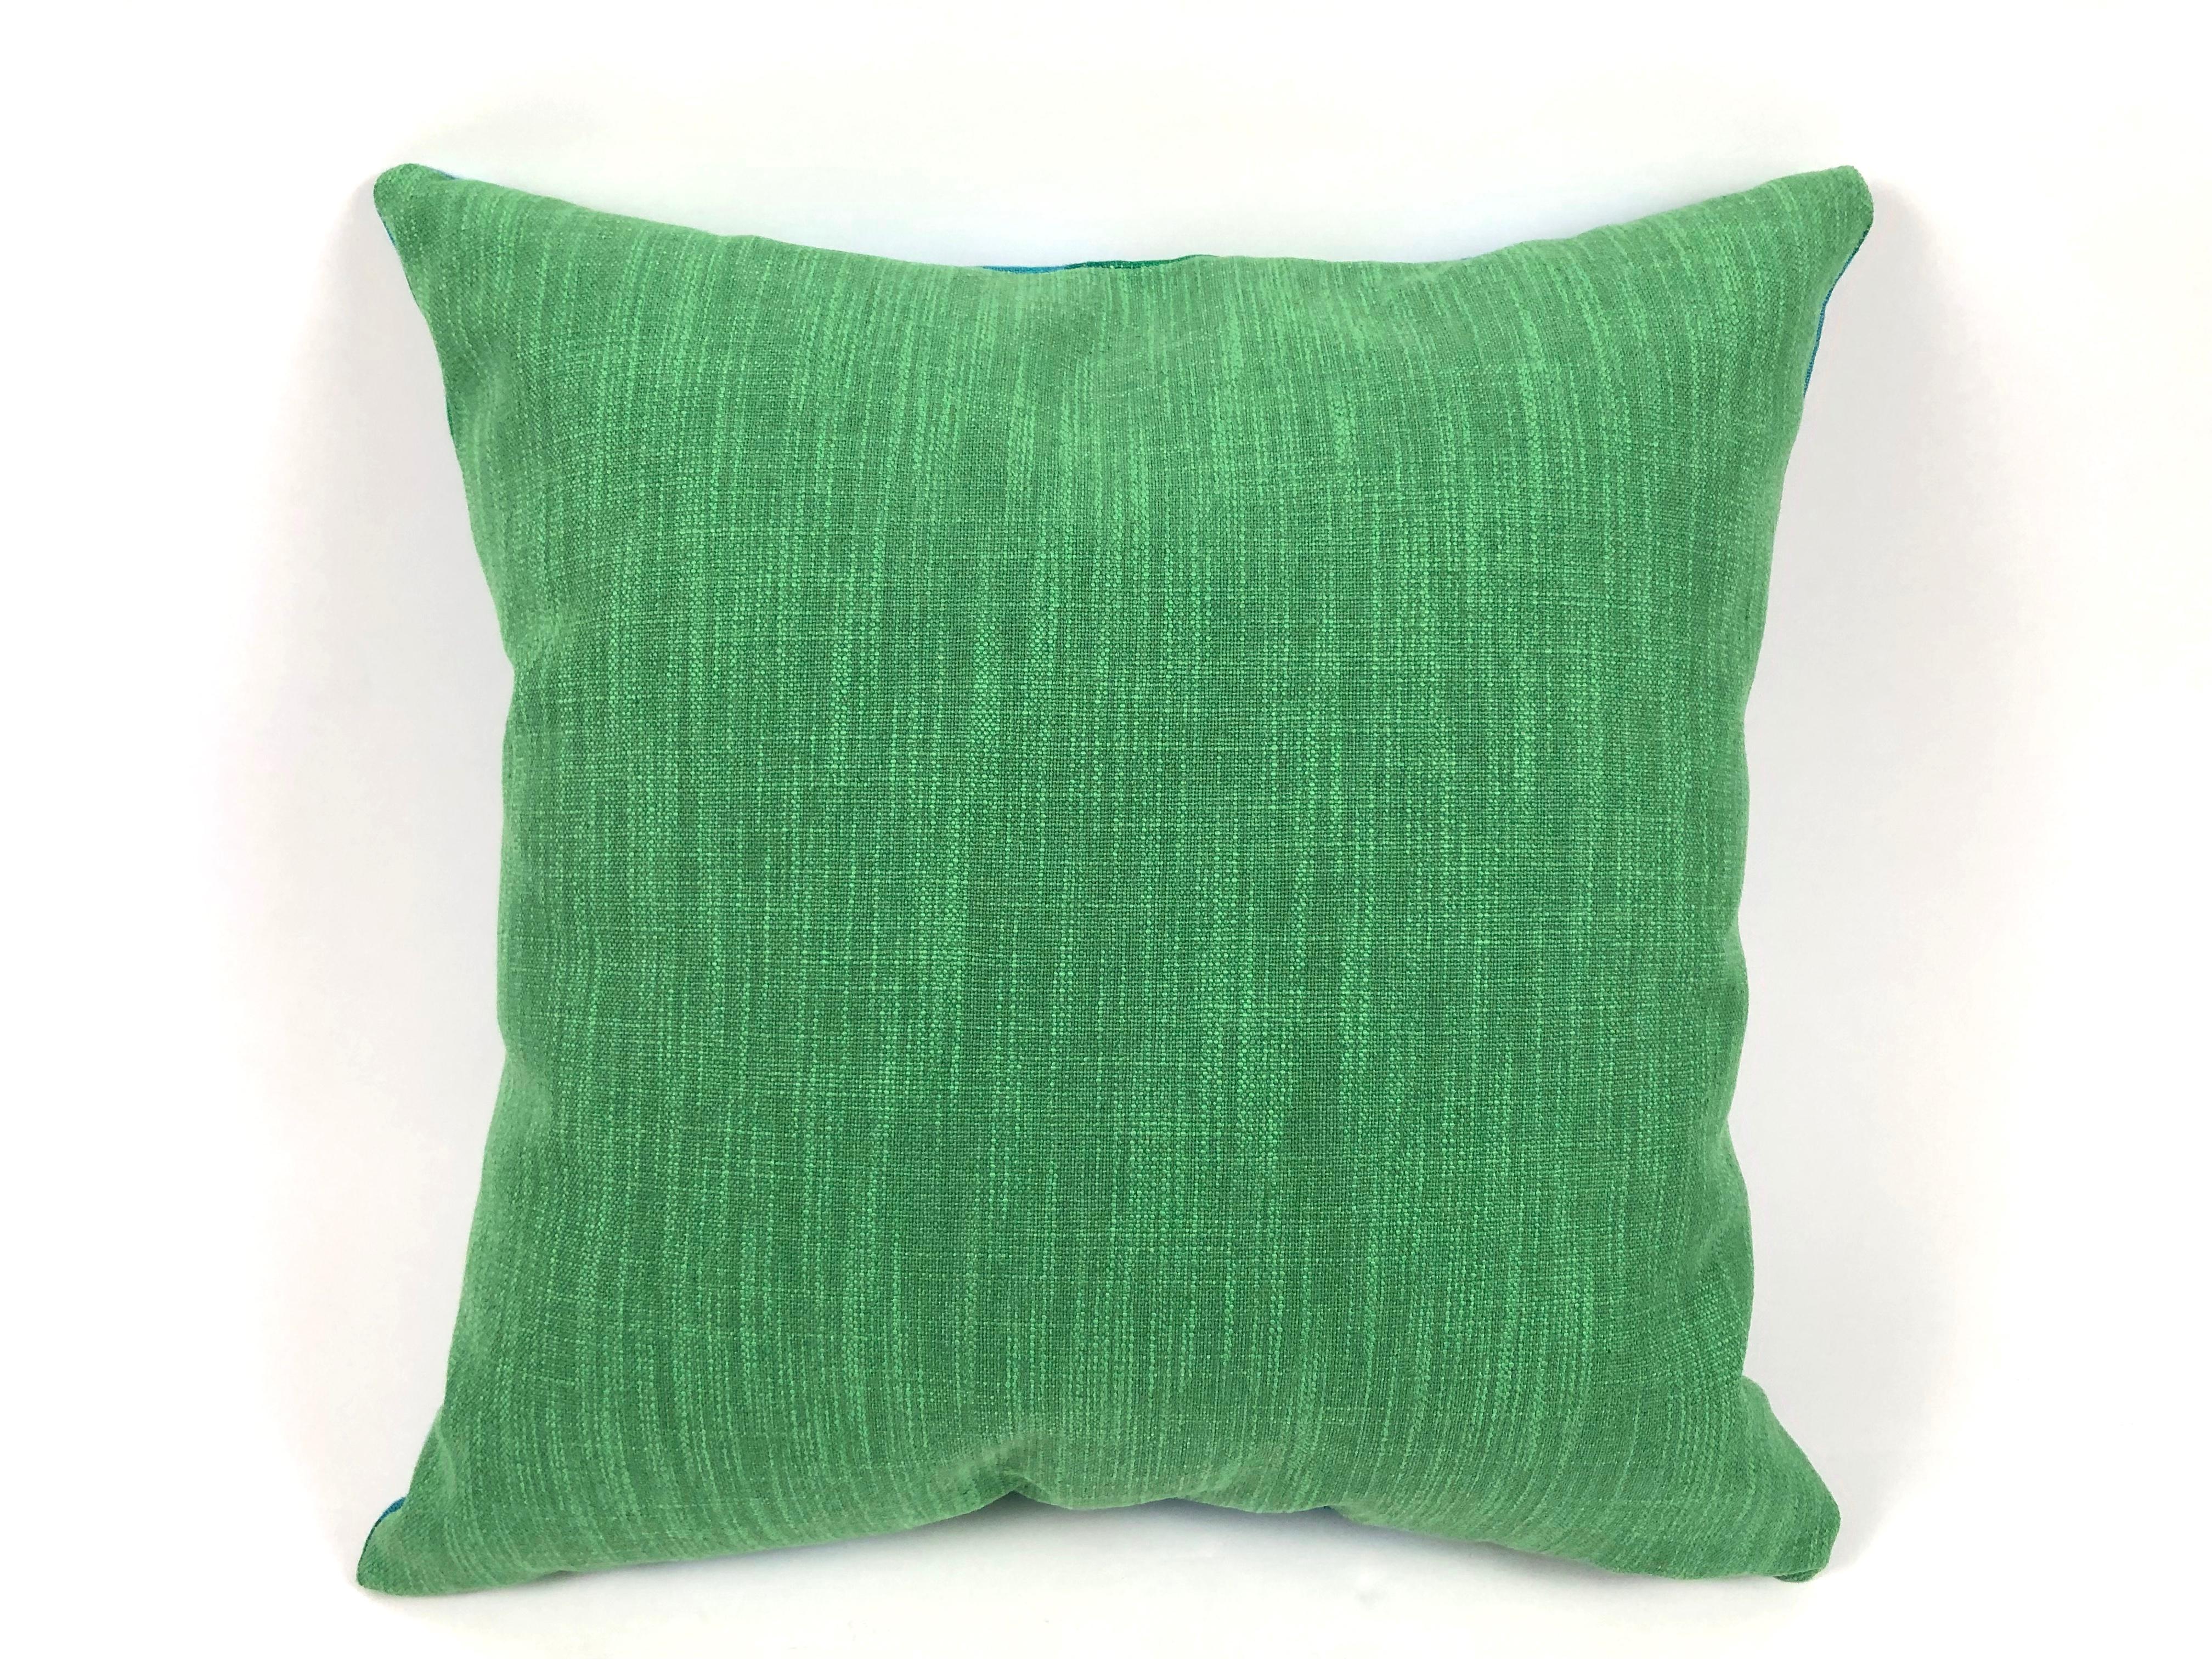 Mid-20th Century Vintage Blue and Green Sea Scroll Pattern Pillow Hand Printed by Elenhank